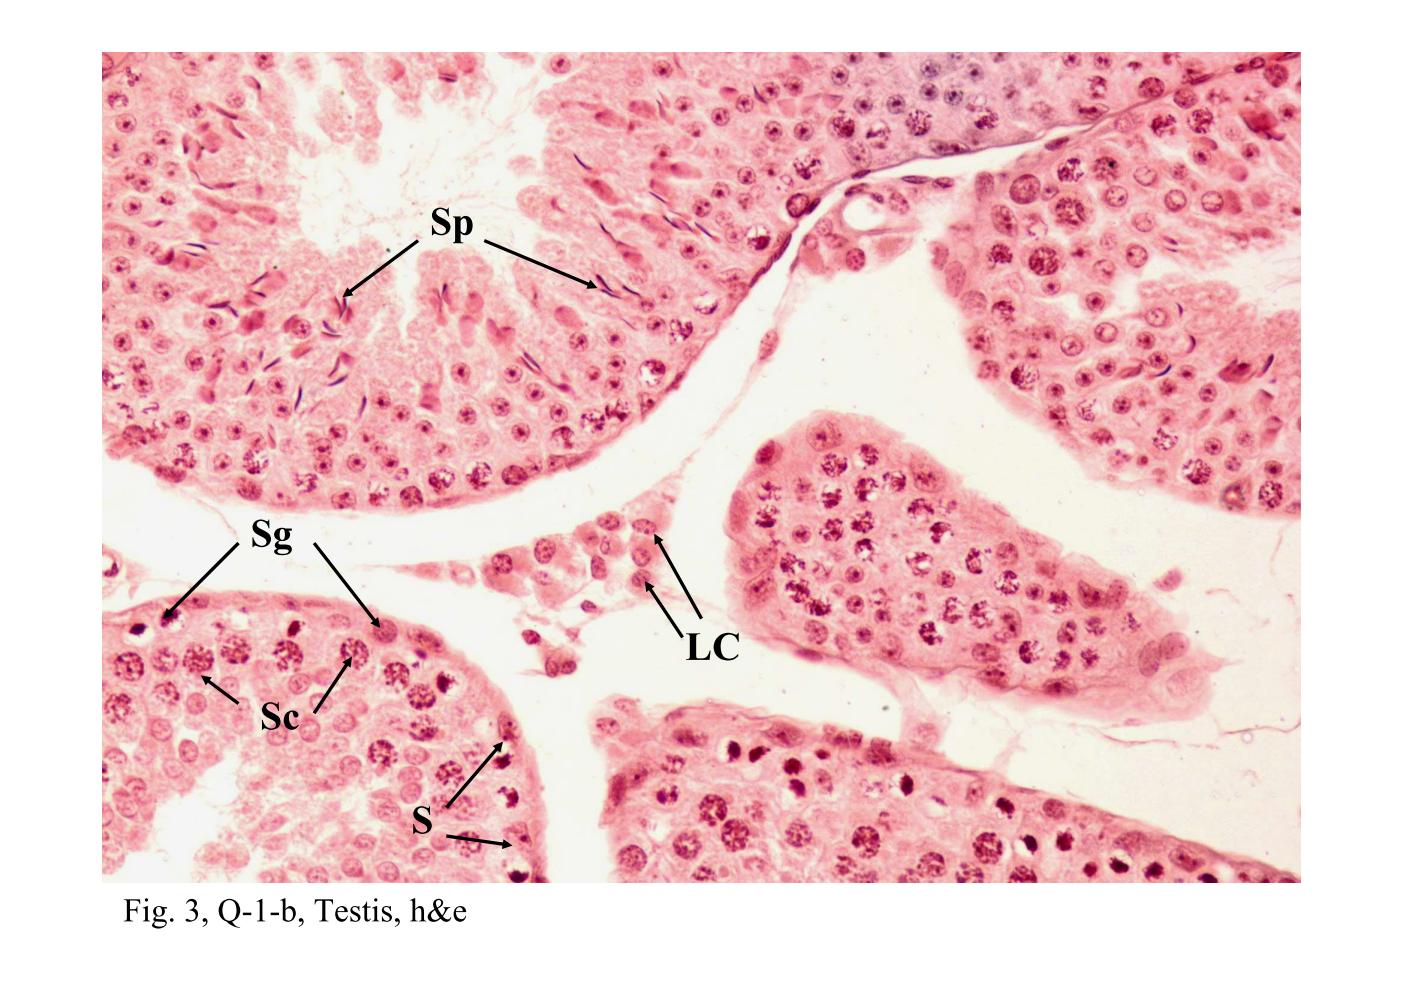 block14_08.jpg - Fig. 3 & 4, Q-1-b, Testis, h&e; 93W7206, Testis, ihExamination of the tubule epithelium reveals two kinds of cells: a  proliferating population of spermatogenic cells and a non-proliferating  population, the Sertoli cells (S). The Sertoli cells are considerably fewer  and can be recognized by their elongate, trangular, pale-staining nuclei  and conspicuous nucleolus. The Sertoli cell extends from the periphery of  the tubule to the lumen. The spermatogenic cells consist of successive  generations arranged in concentric layers. The spermatogonia (Sg) are  found at the periphery. The spermatocytes (Sc), most of them have large  round nuclei with a distinctive chromatin pattern, come to lie above the  spermatogonia. The spermatid (Sp) consists of one or two generations and  occupies the site closest to the lumen.In high magnification, it reveals a population of Leydig cells (LC) that occur  in small clusters and lie in the interstitial space between adjacent tubules.  They are readily identified by their location, small round nucleus and  eosinophilic cytoplasm.